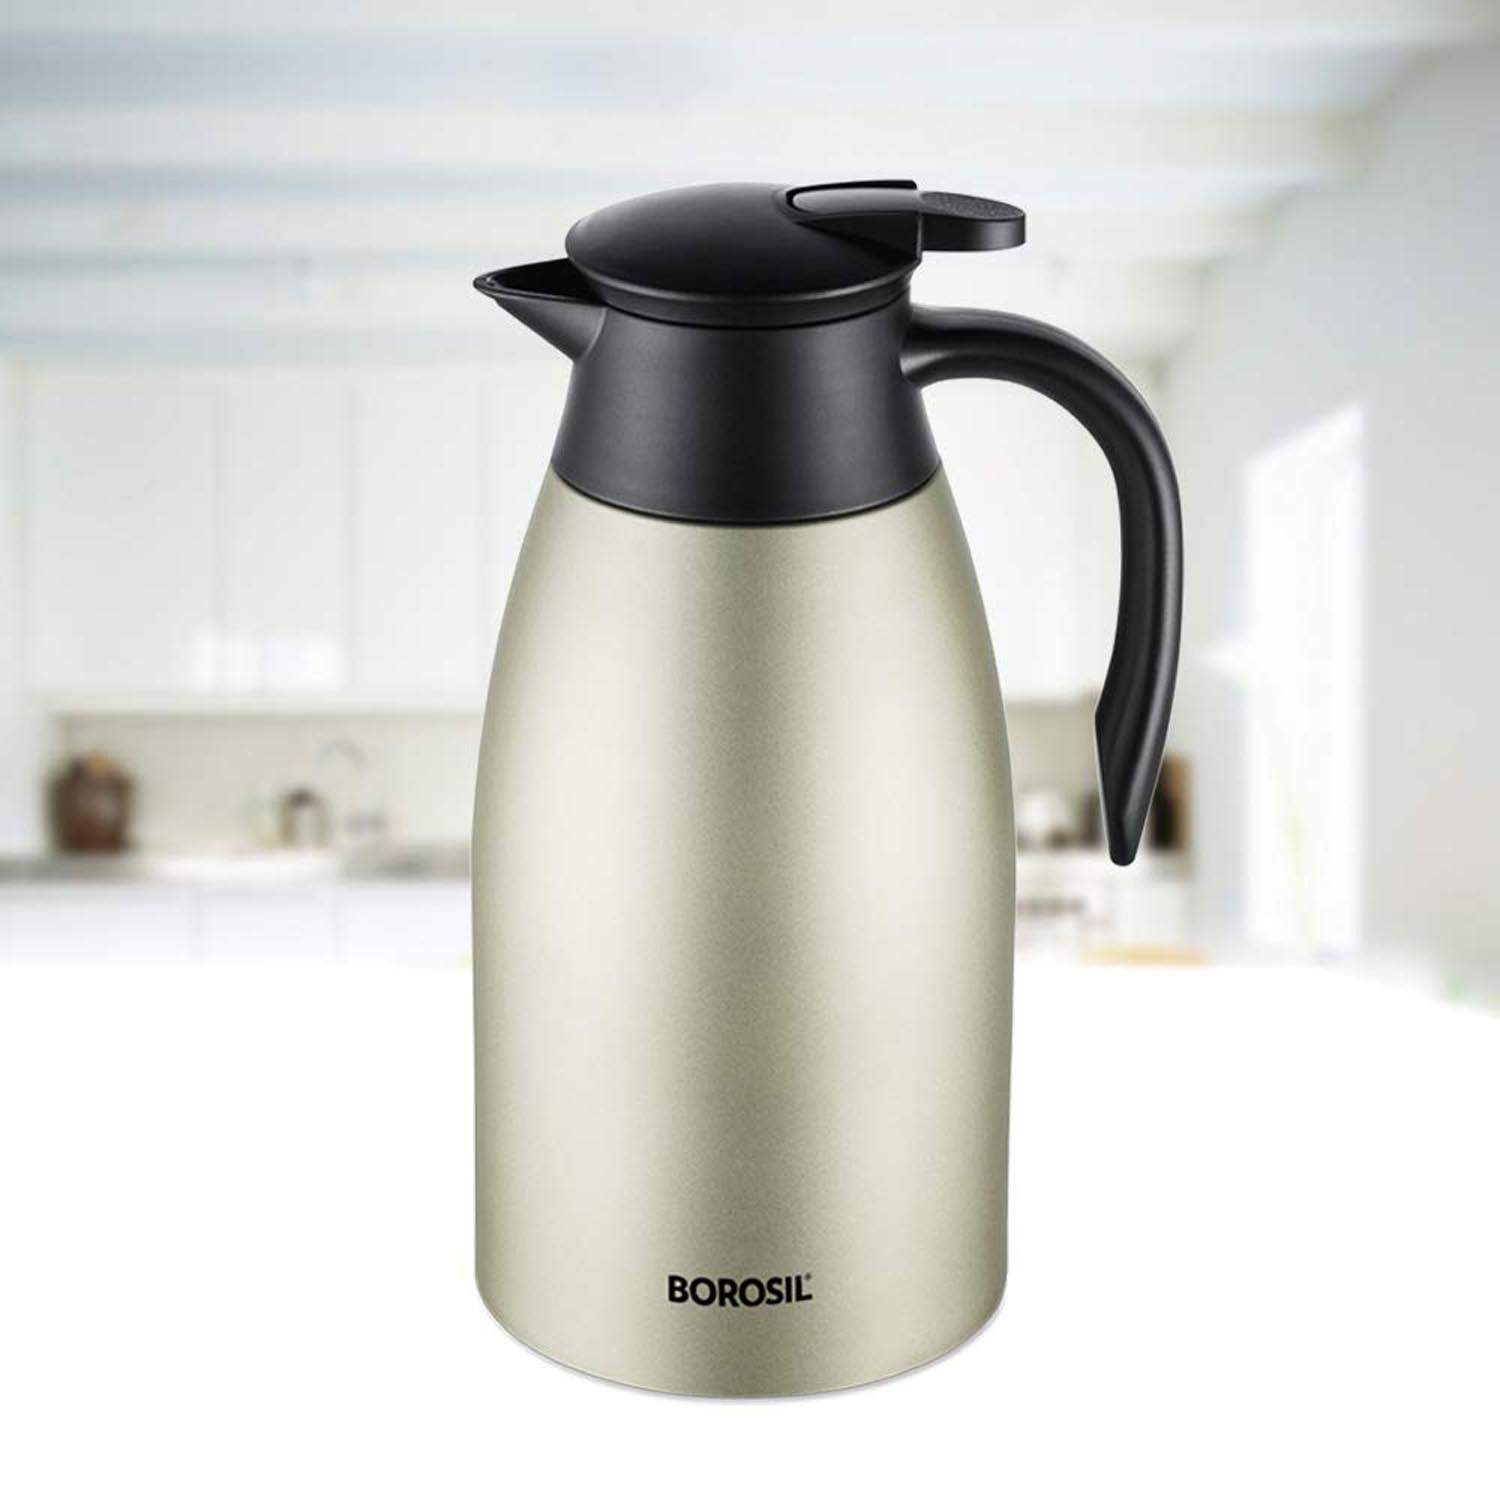 Borosil Vacuum Insulated Teapot Flask - Stainless Steel - 2 Litre - FLKT20L0Y11